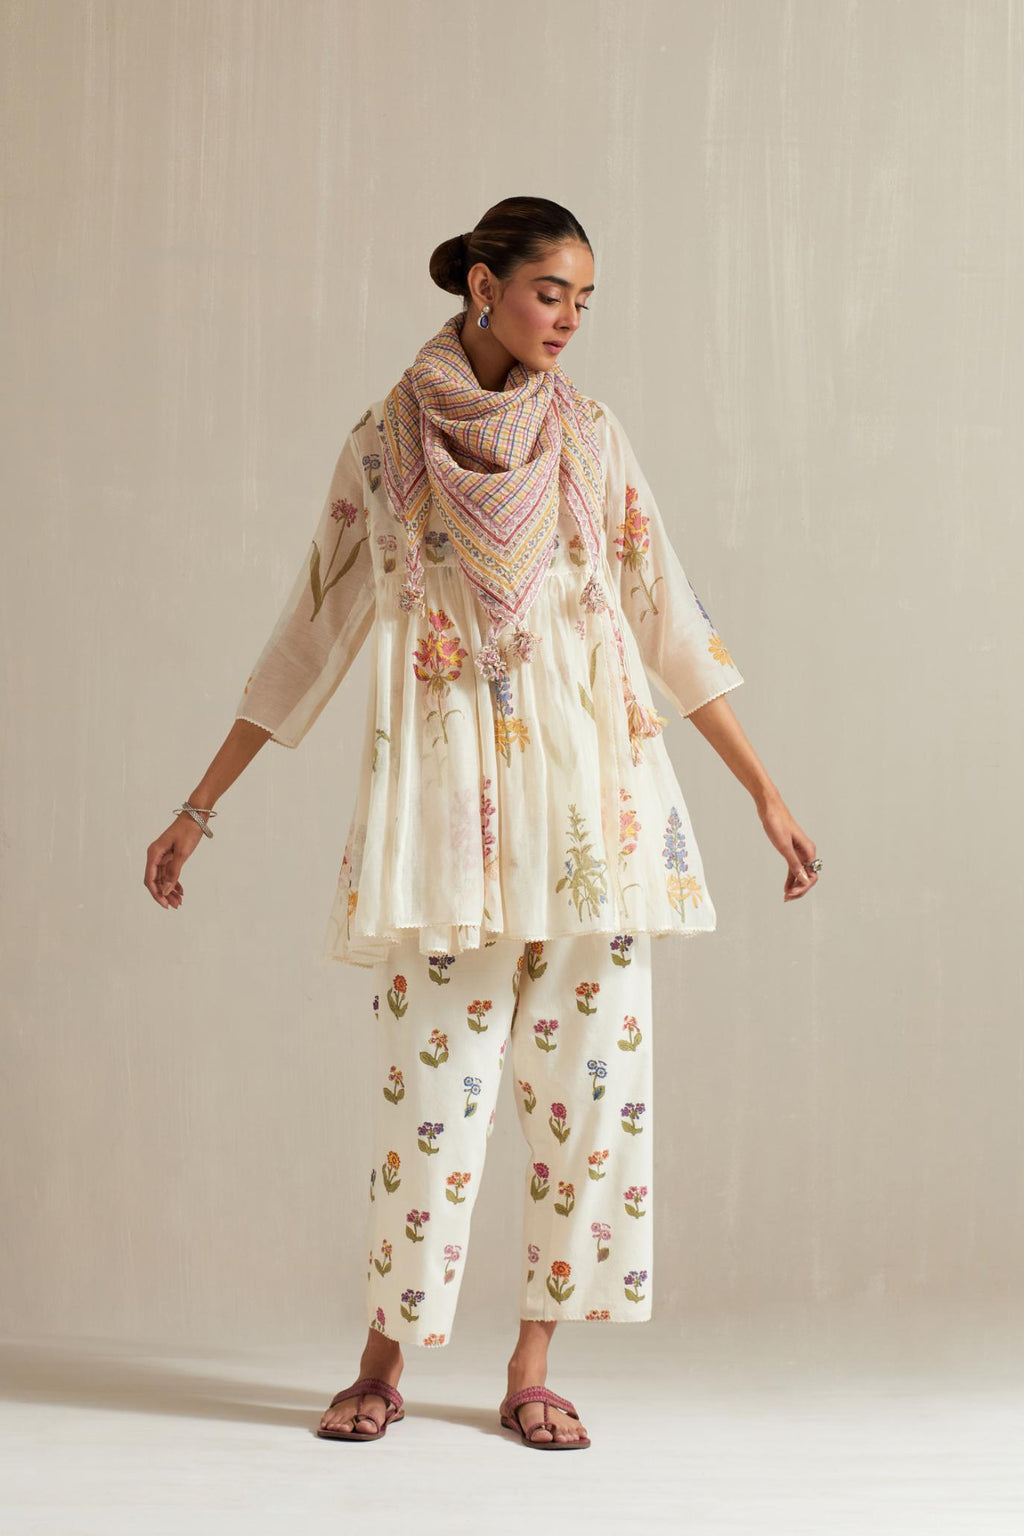 Off white hand block printed short angrakha kurta set with all-over multi colored flower.